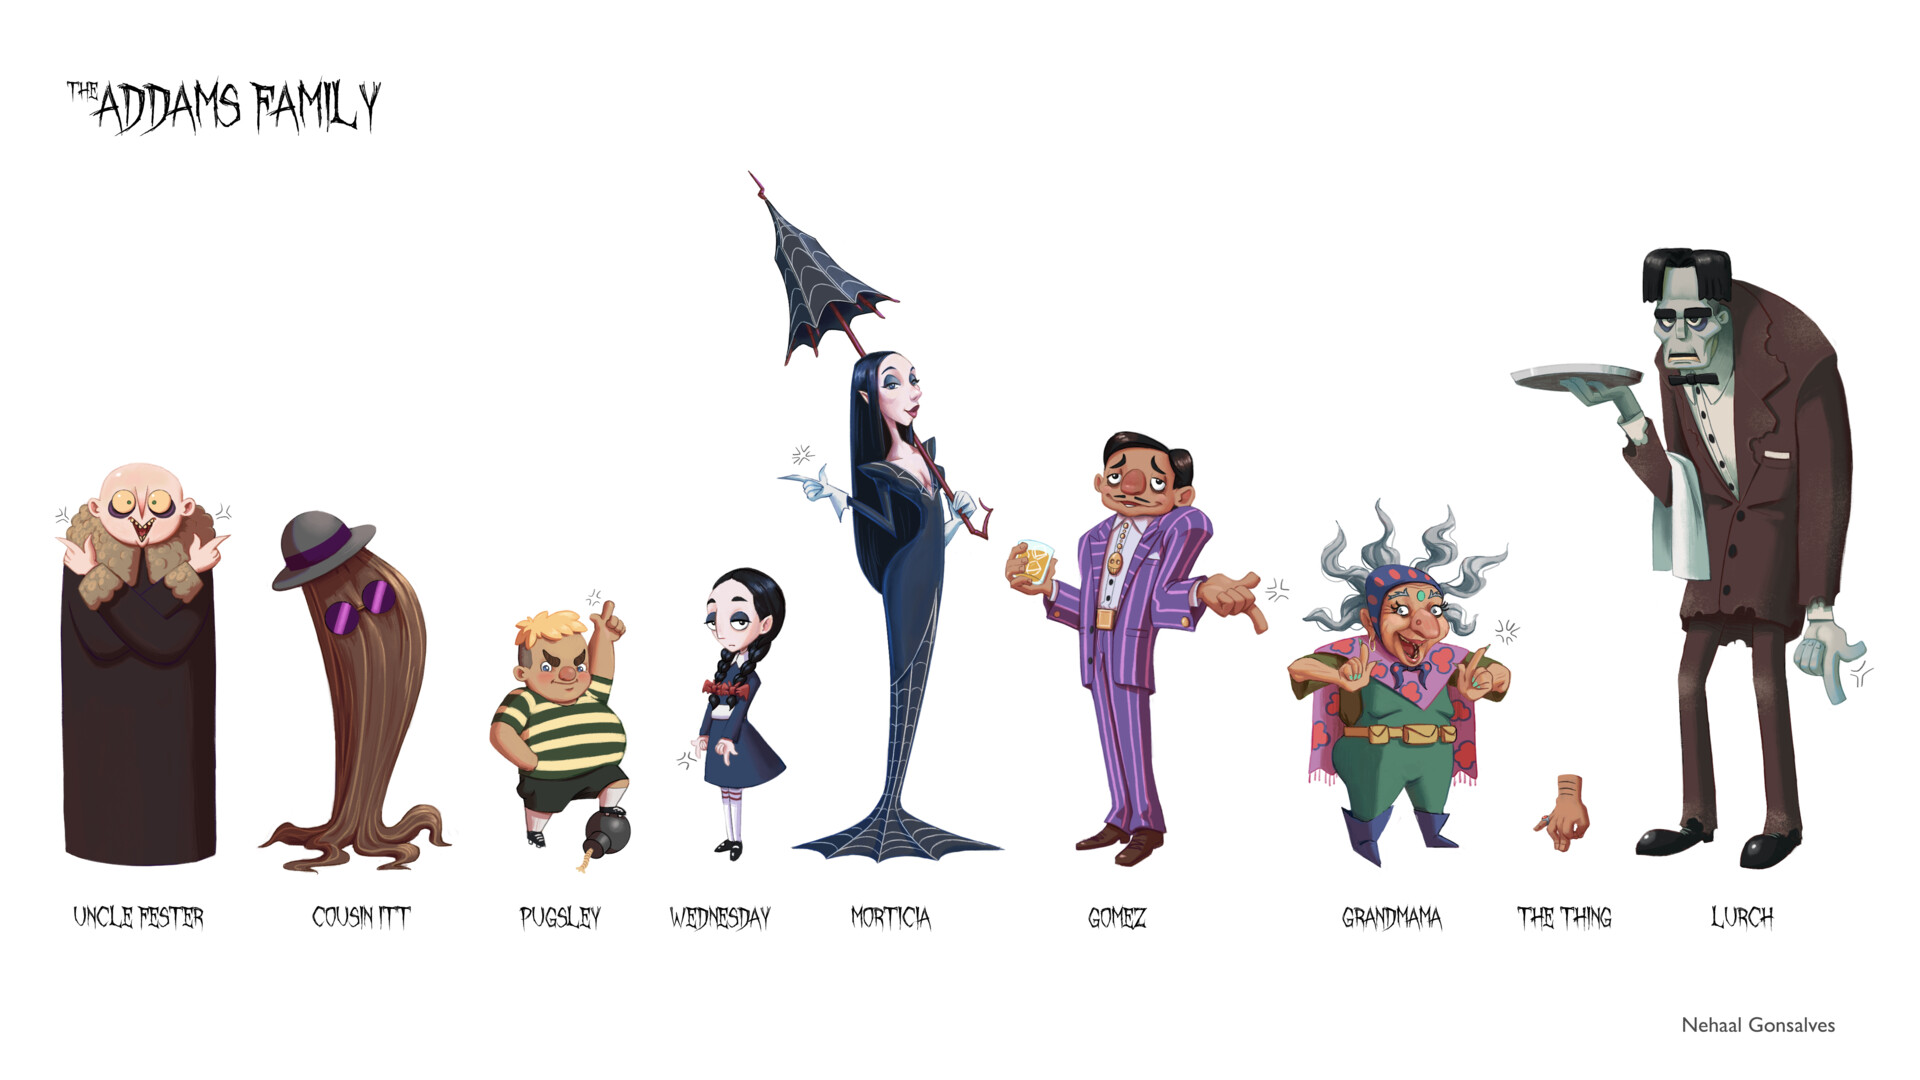 Nehaal Gonsalves - The Addams Family (Indian Redesign)